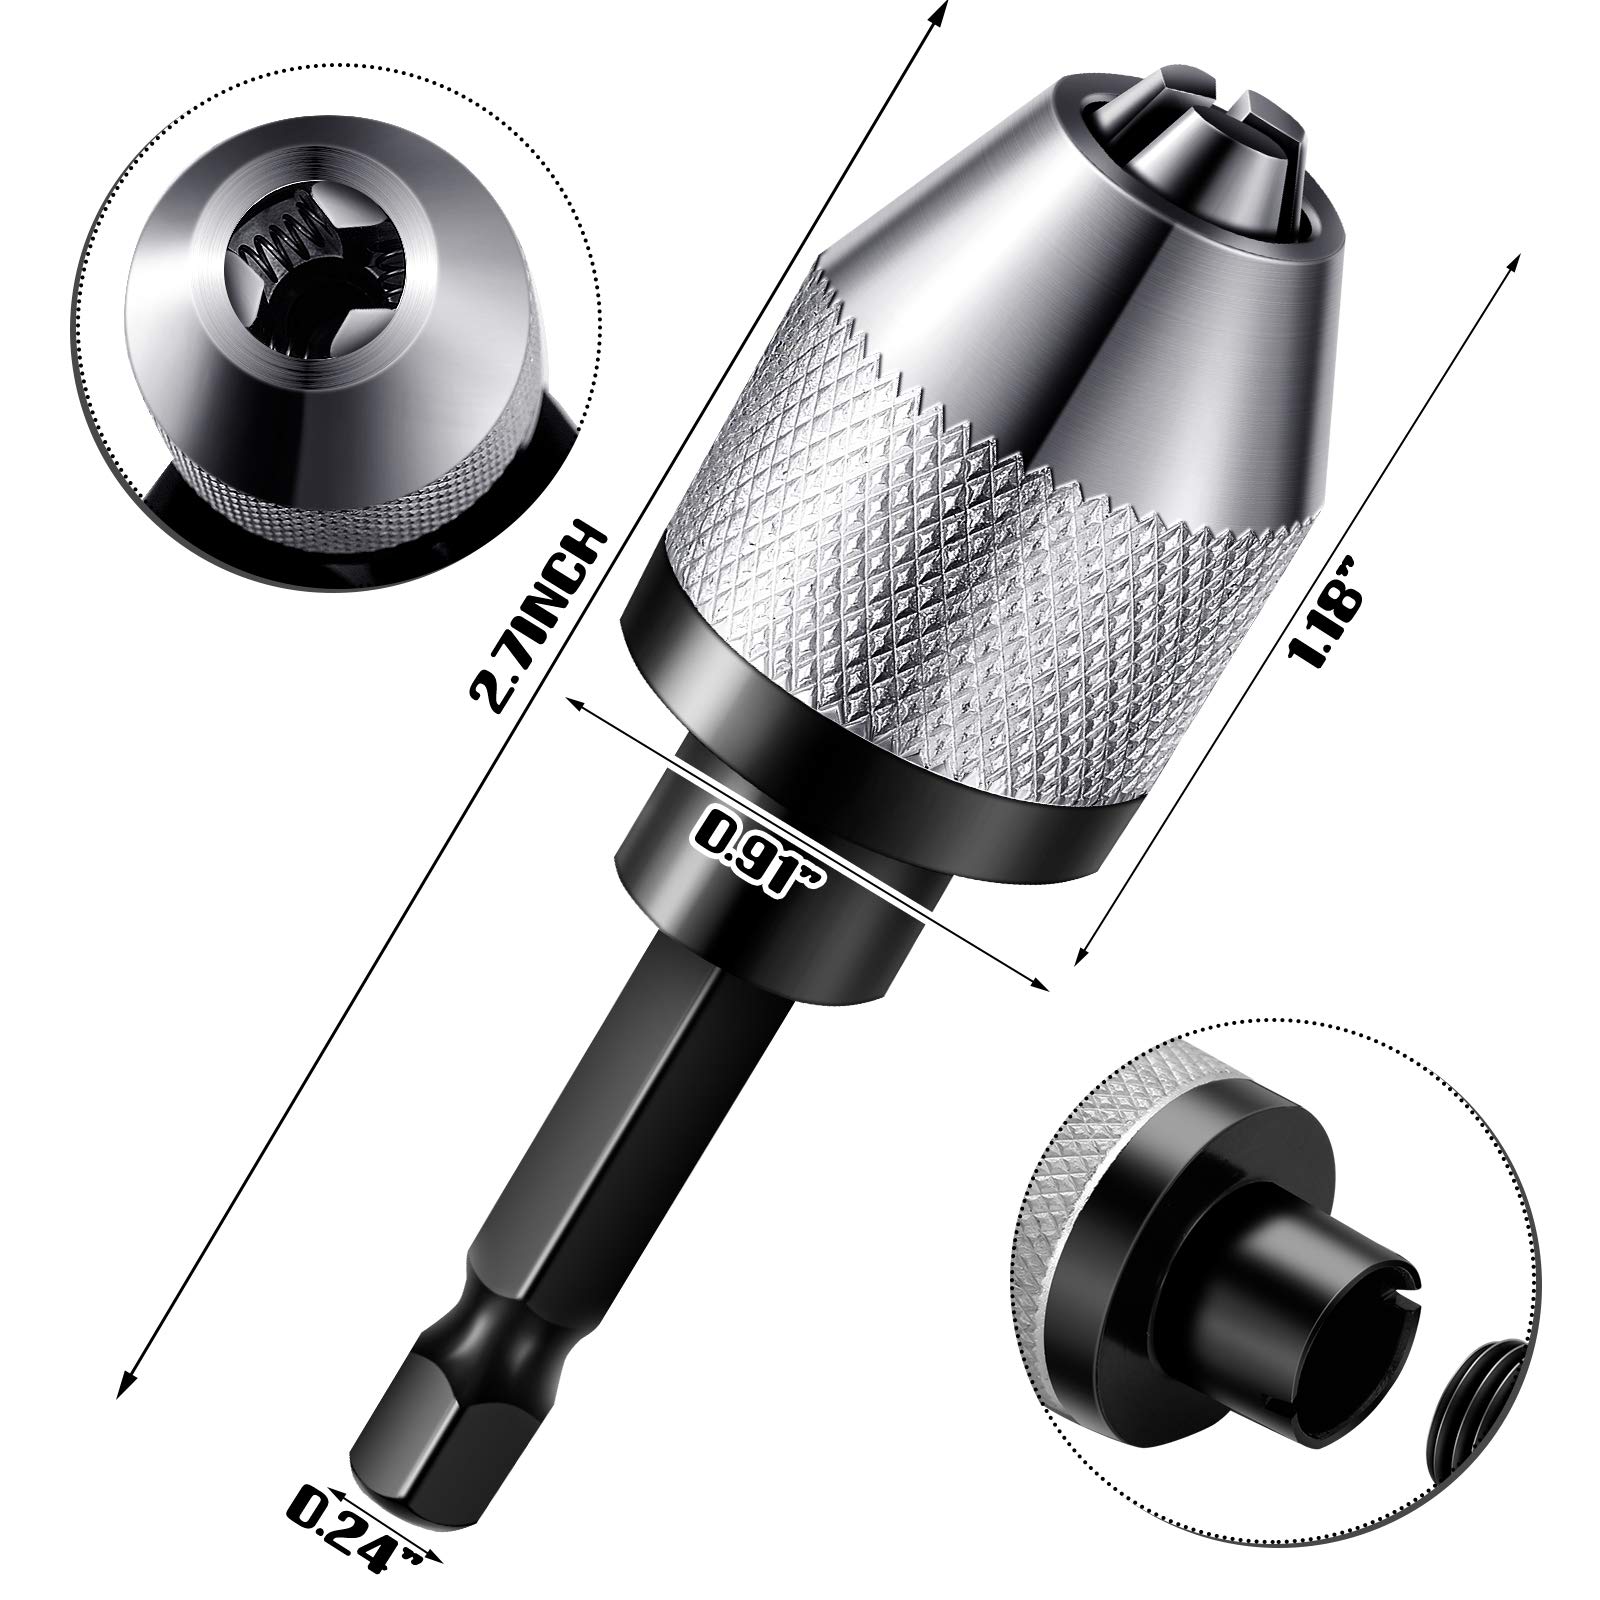 Keyless Drill Chuck Bit 1/4 Inch Hex Shank Keyless Drill Chuck Fast Change Converter Extension Screwdriver Drill Adapter in 0.3-6.5 mm, 0.3-3.6 mm for Impact Drill Tool Attachment (2 Pieces)